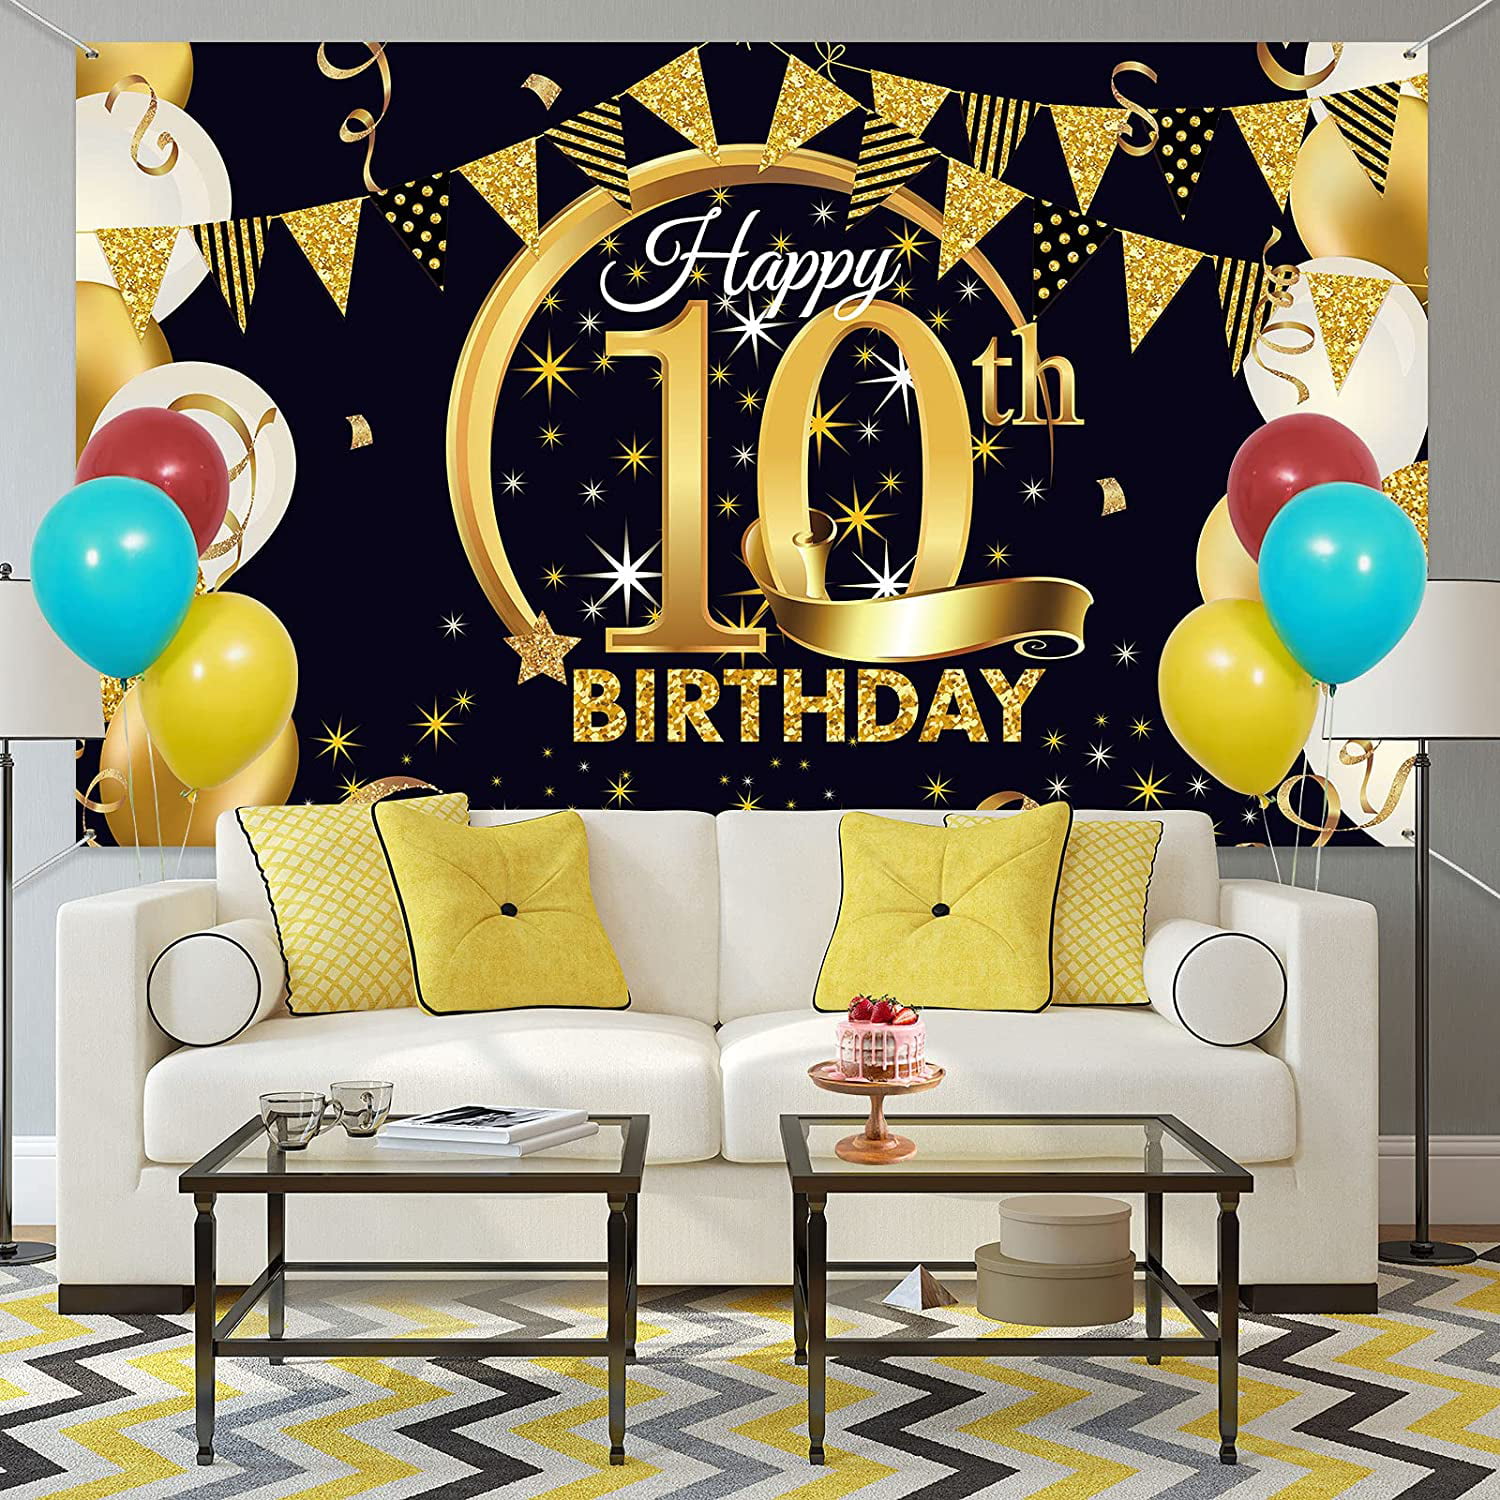 Birthday Party Supplies 59th Birthday Party Decoration Extra Large Fabric Black Gold Sign Poster for Anniversary Photo Booth Backdrop Background Banner 72.8 x 43.3 Inch